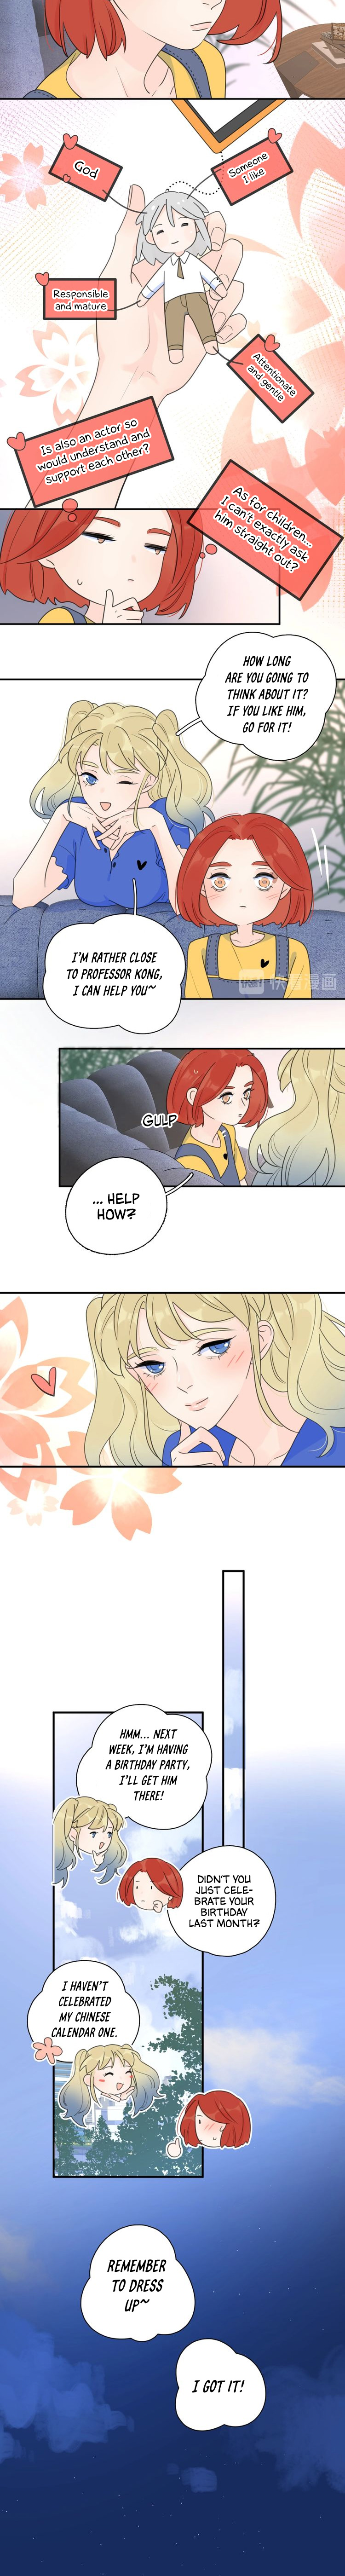 The Looks Of Love: The Heart Has Its Reasons - Page 3